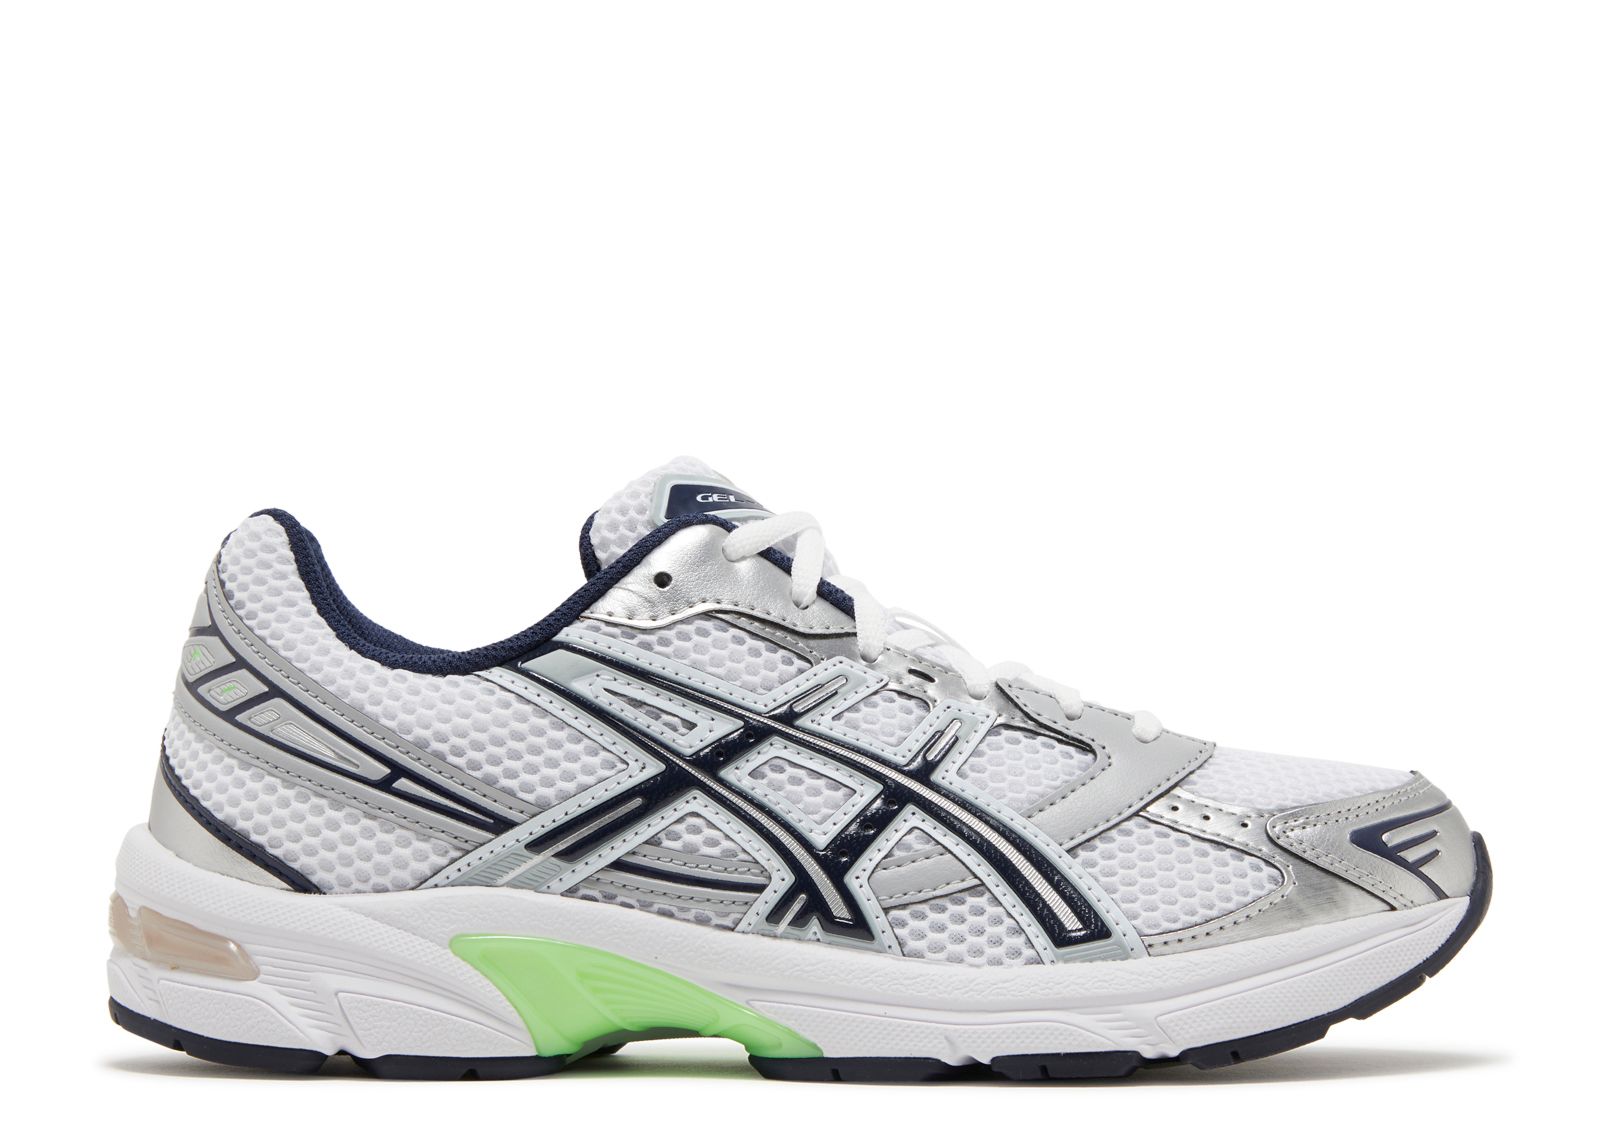 Gel 1130 'Mid Grey Lime' - ASICS - 1201A256 114 - white/mid grey ...